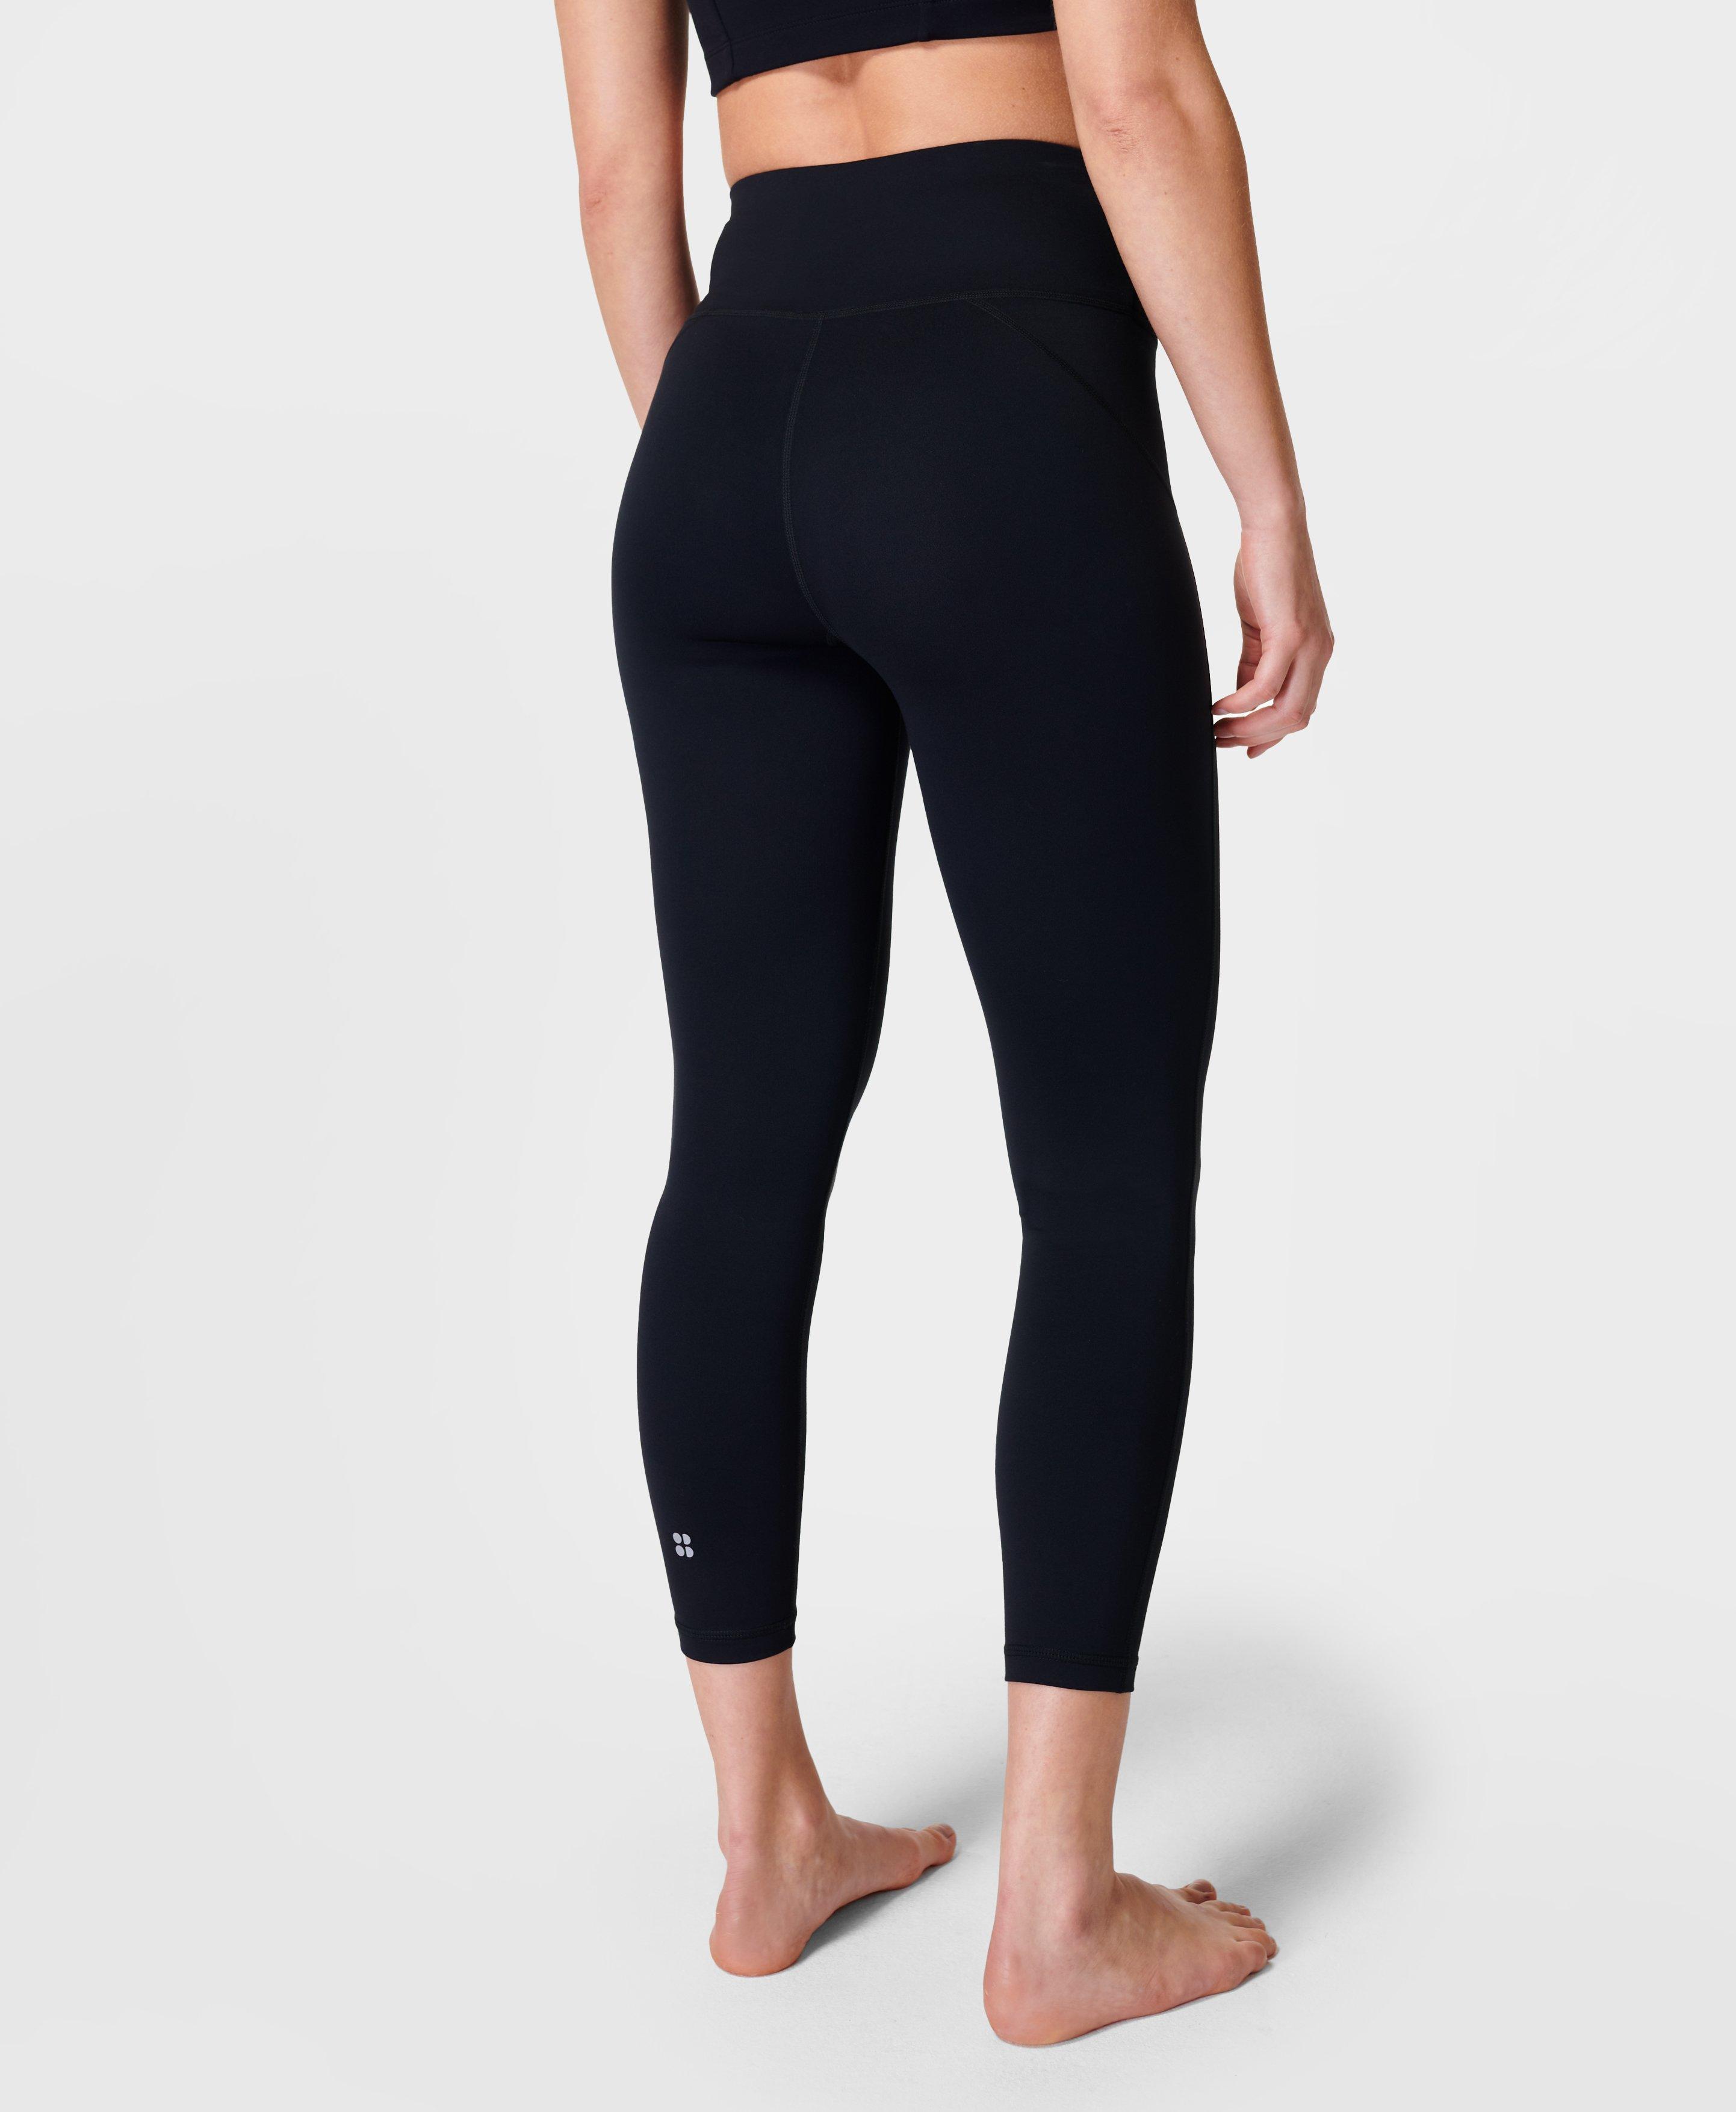 Women's High Waisted Everyday Active 7/8 Leggings - A New Day